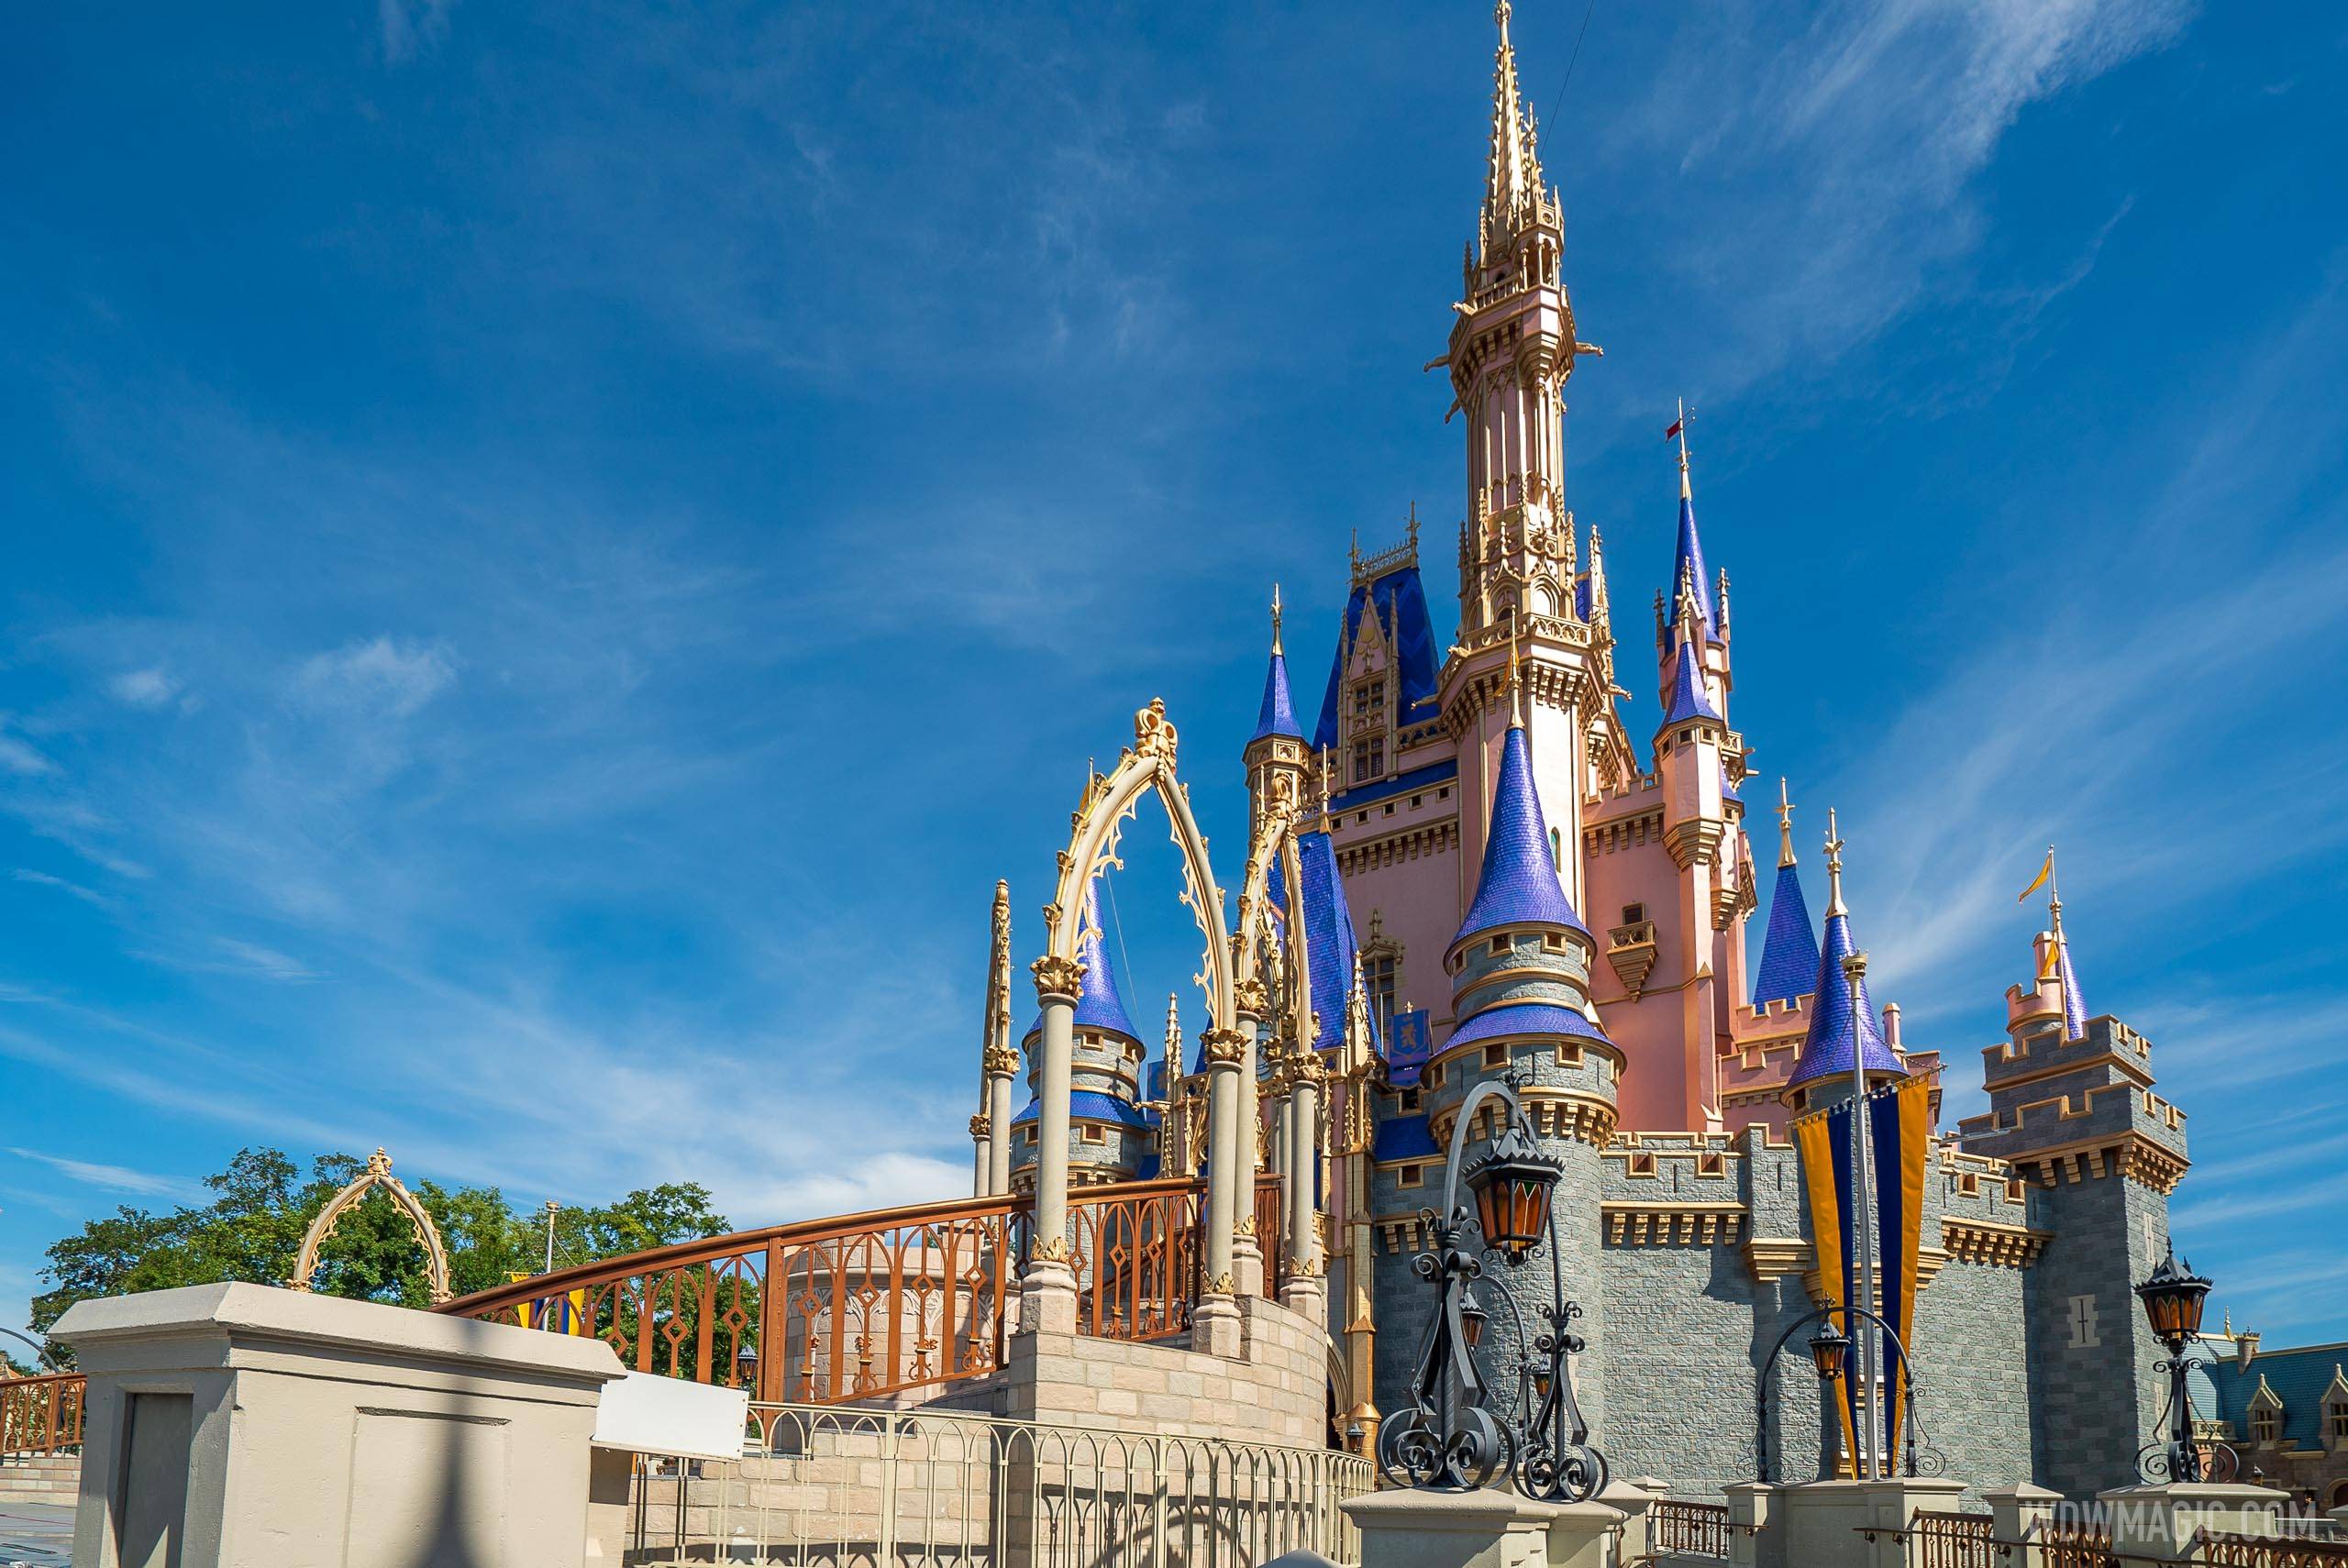 Completed new-look Cinderella Castle